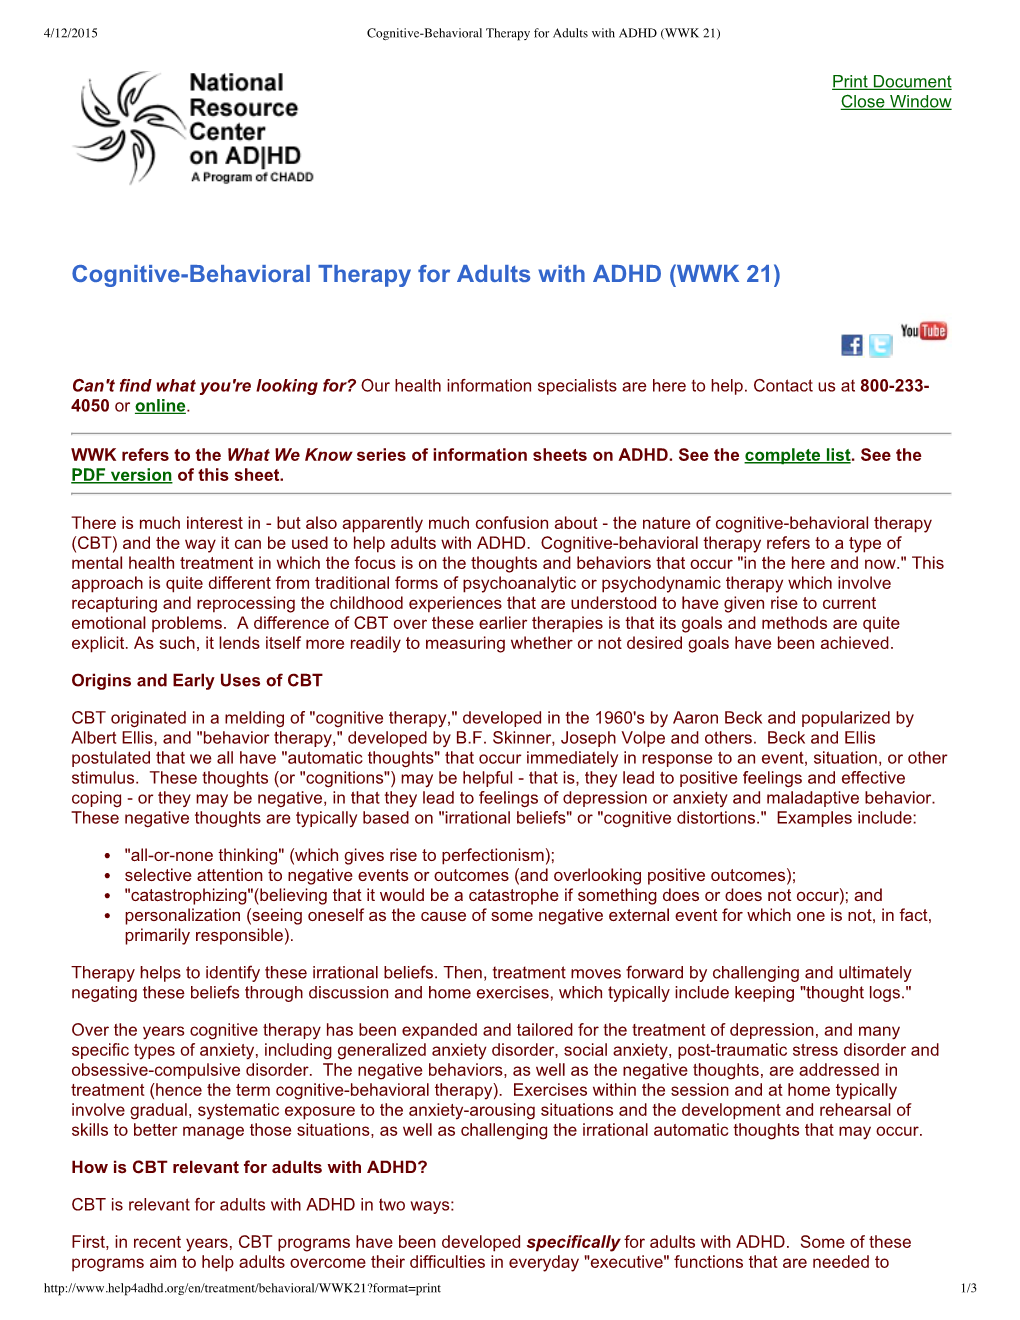 Cognitivebehavioral Therapy for Adults with ADHD (WWK